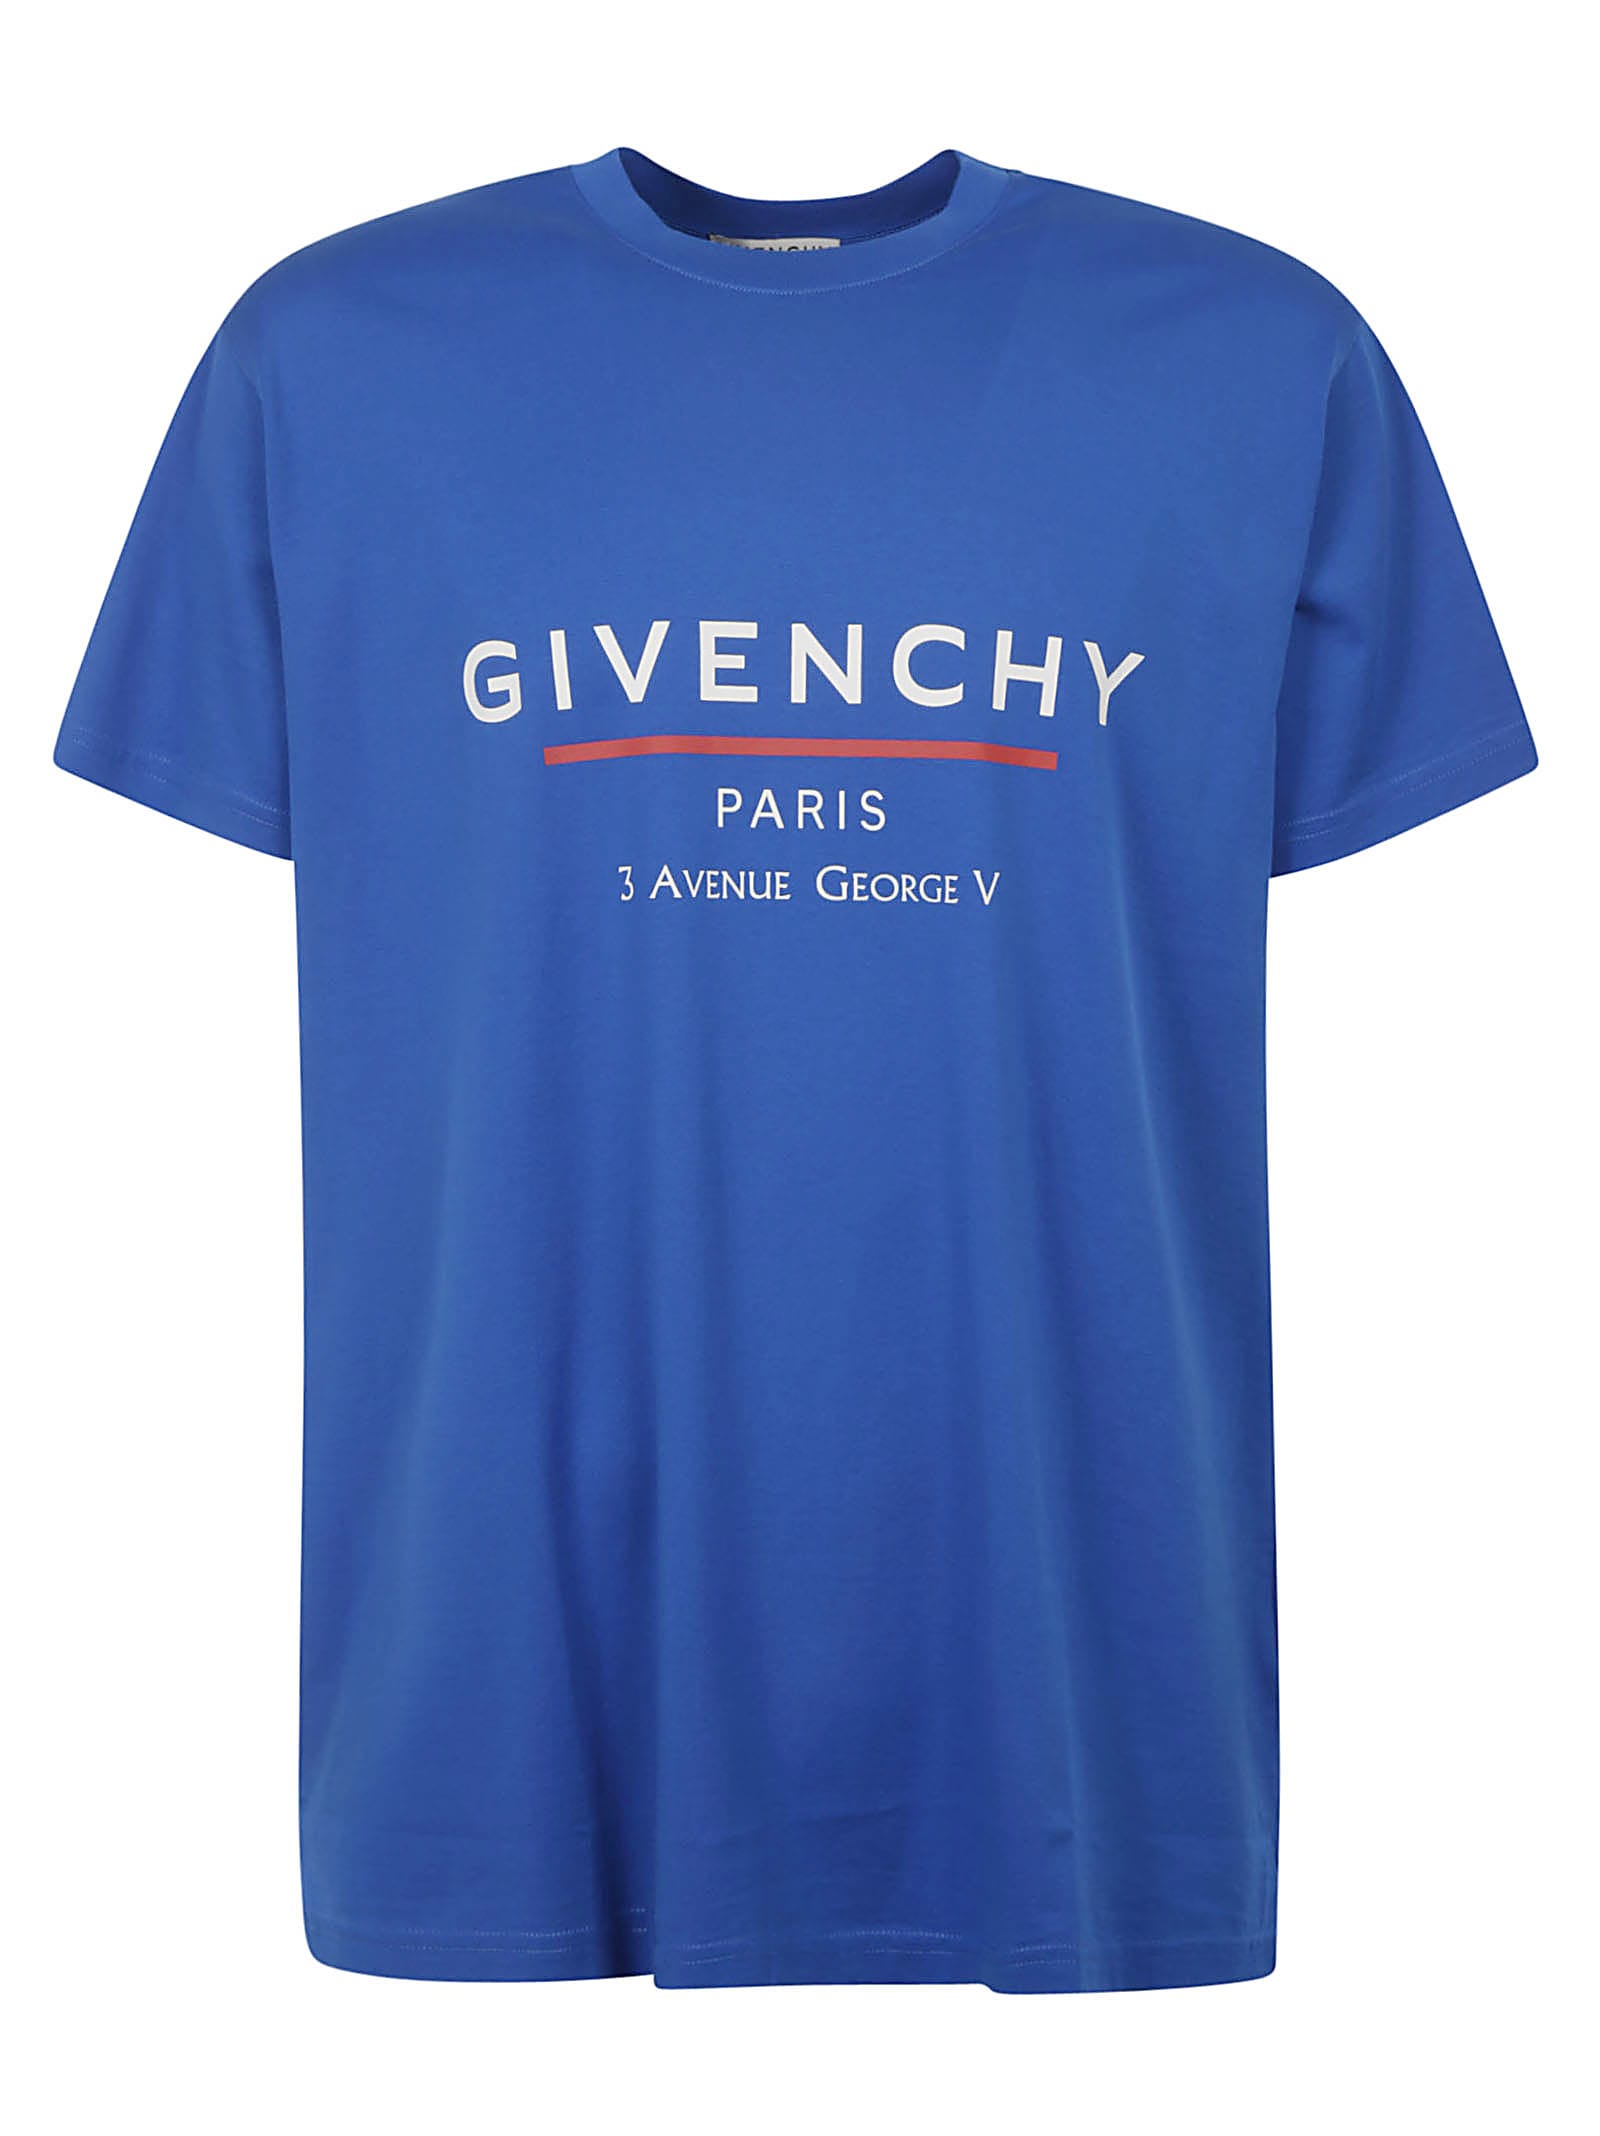 price of givenchy t shirt